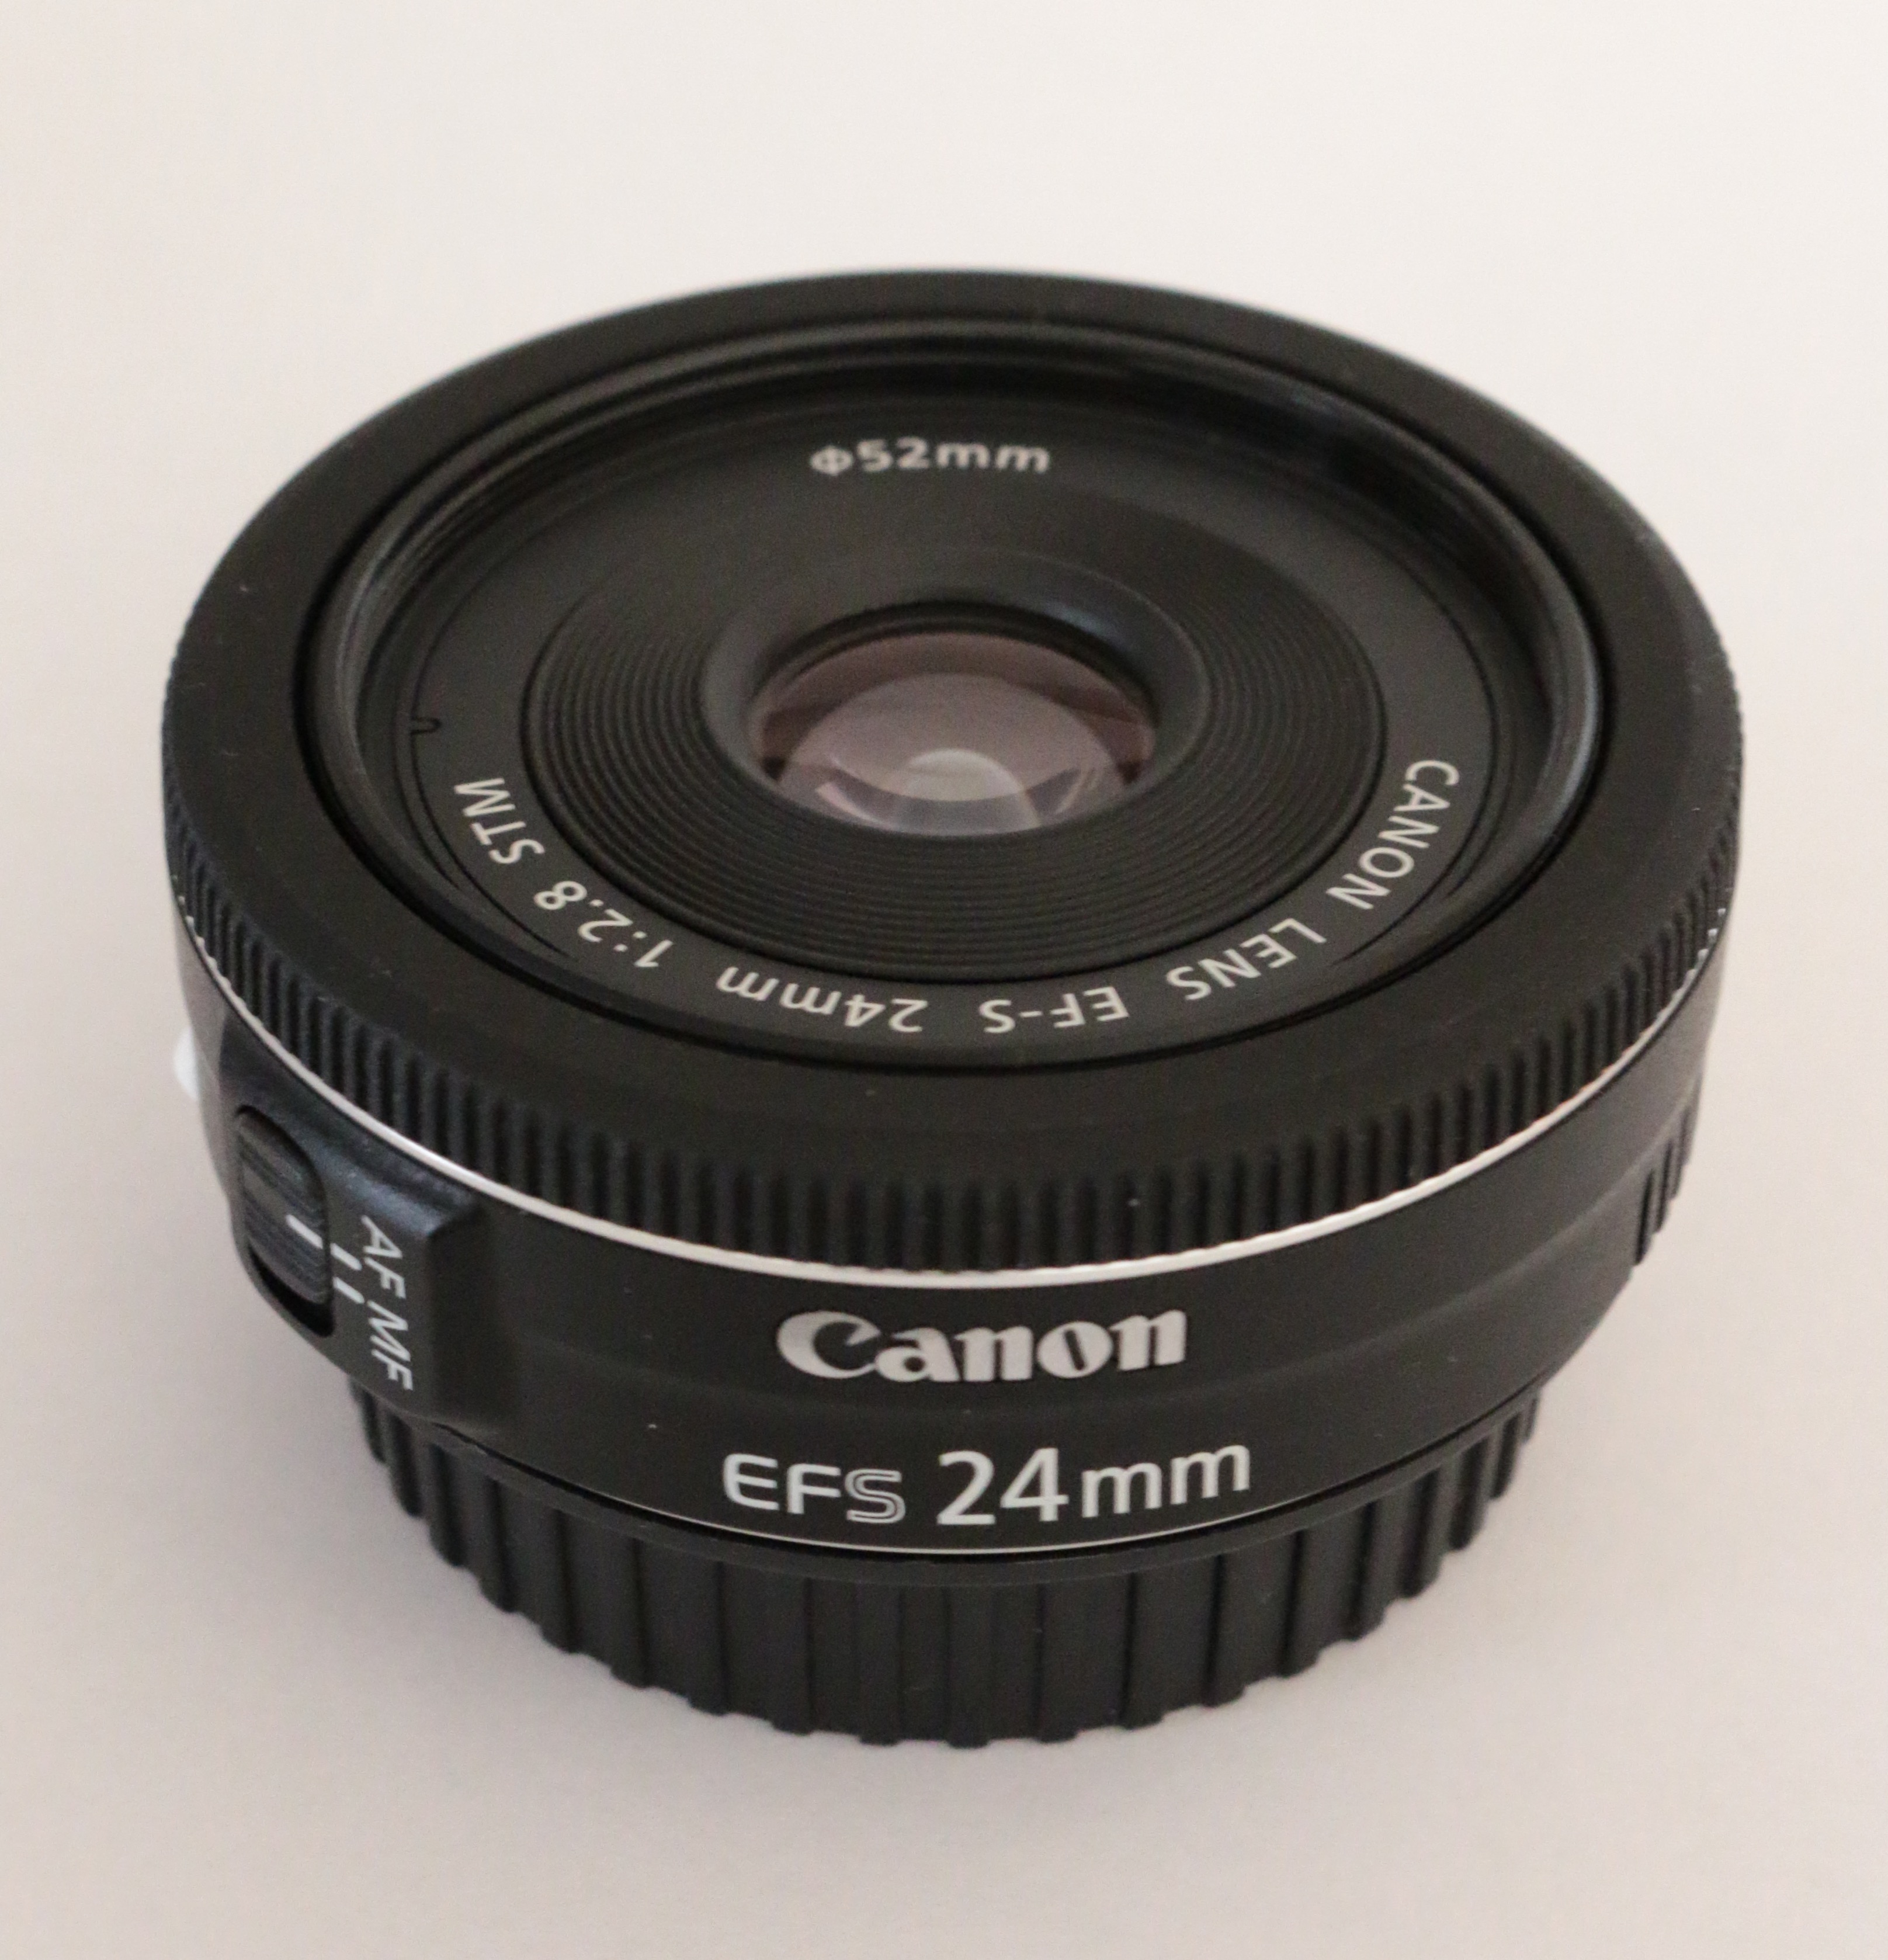 File:Canon EF-S 24mm F2.8 STM 2.jpg - Wikimedia Commons